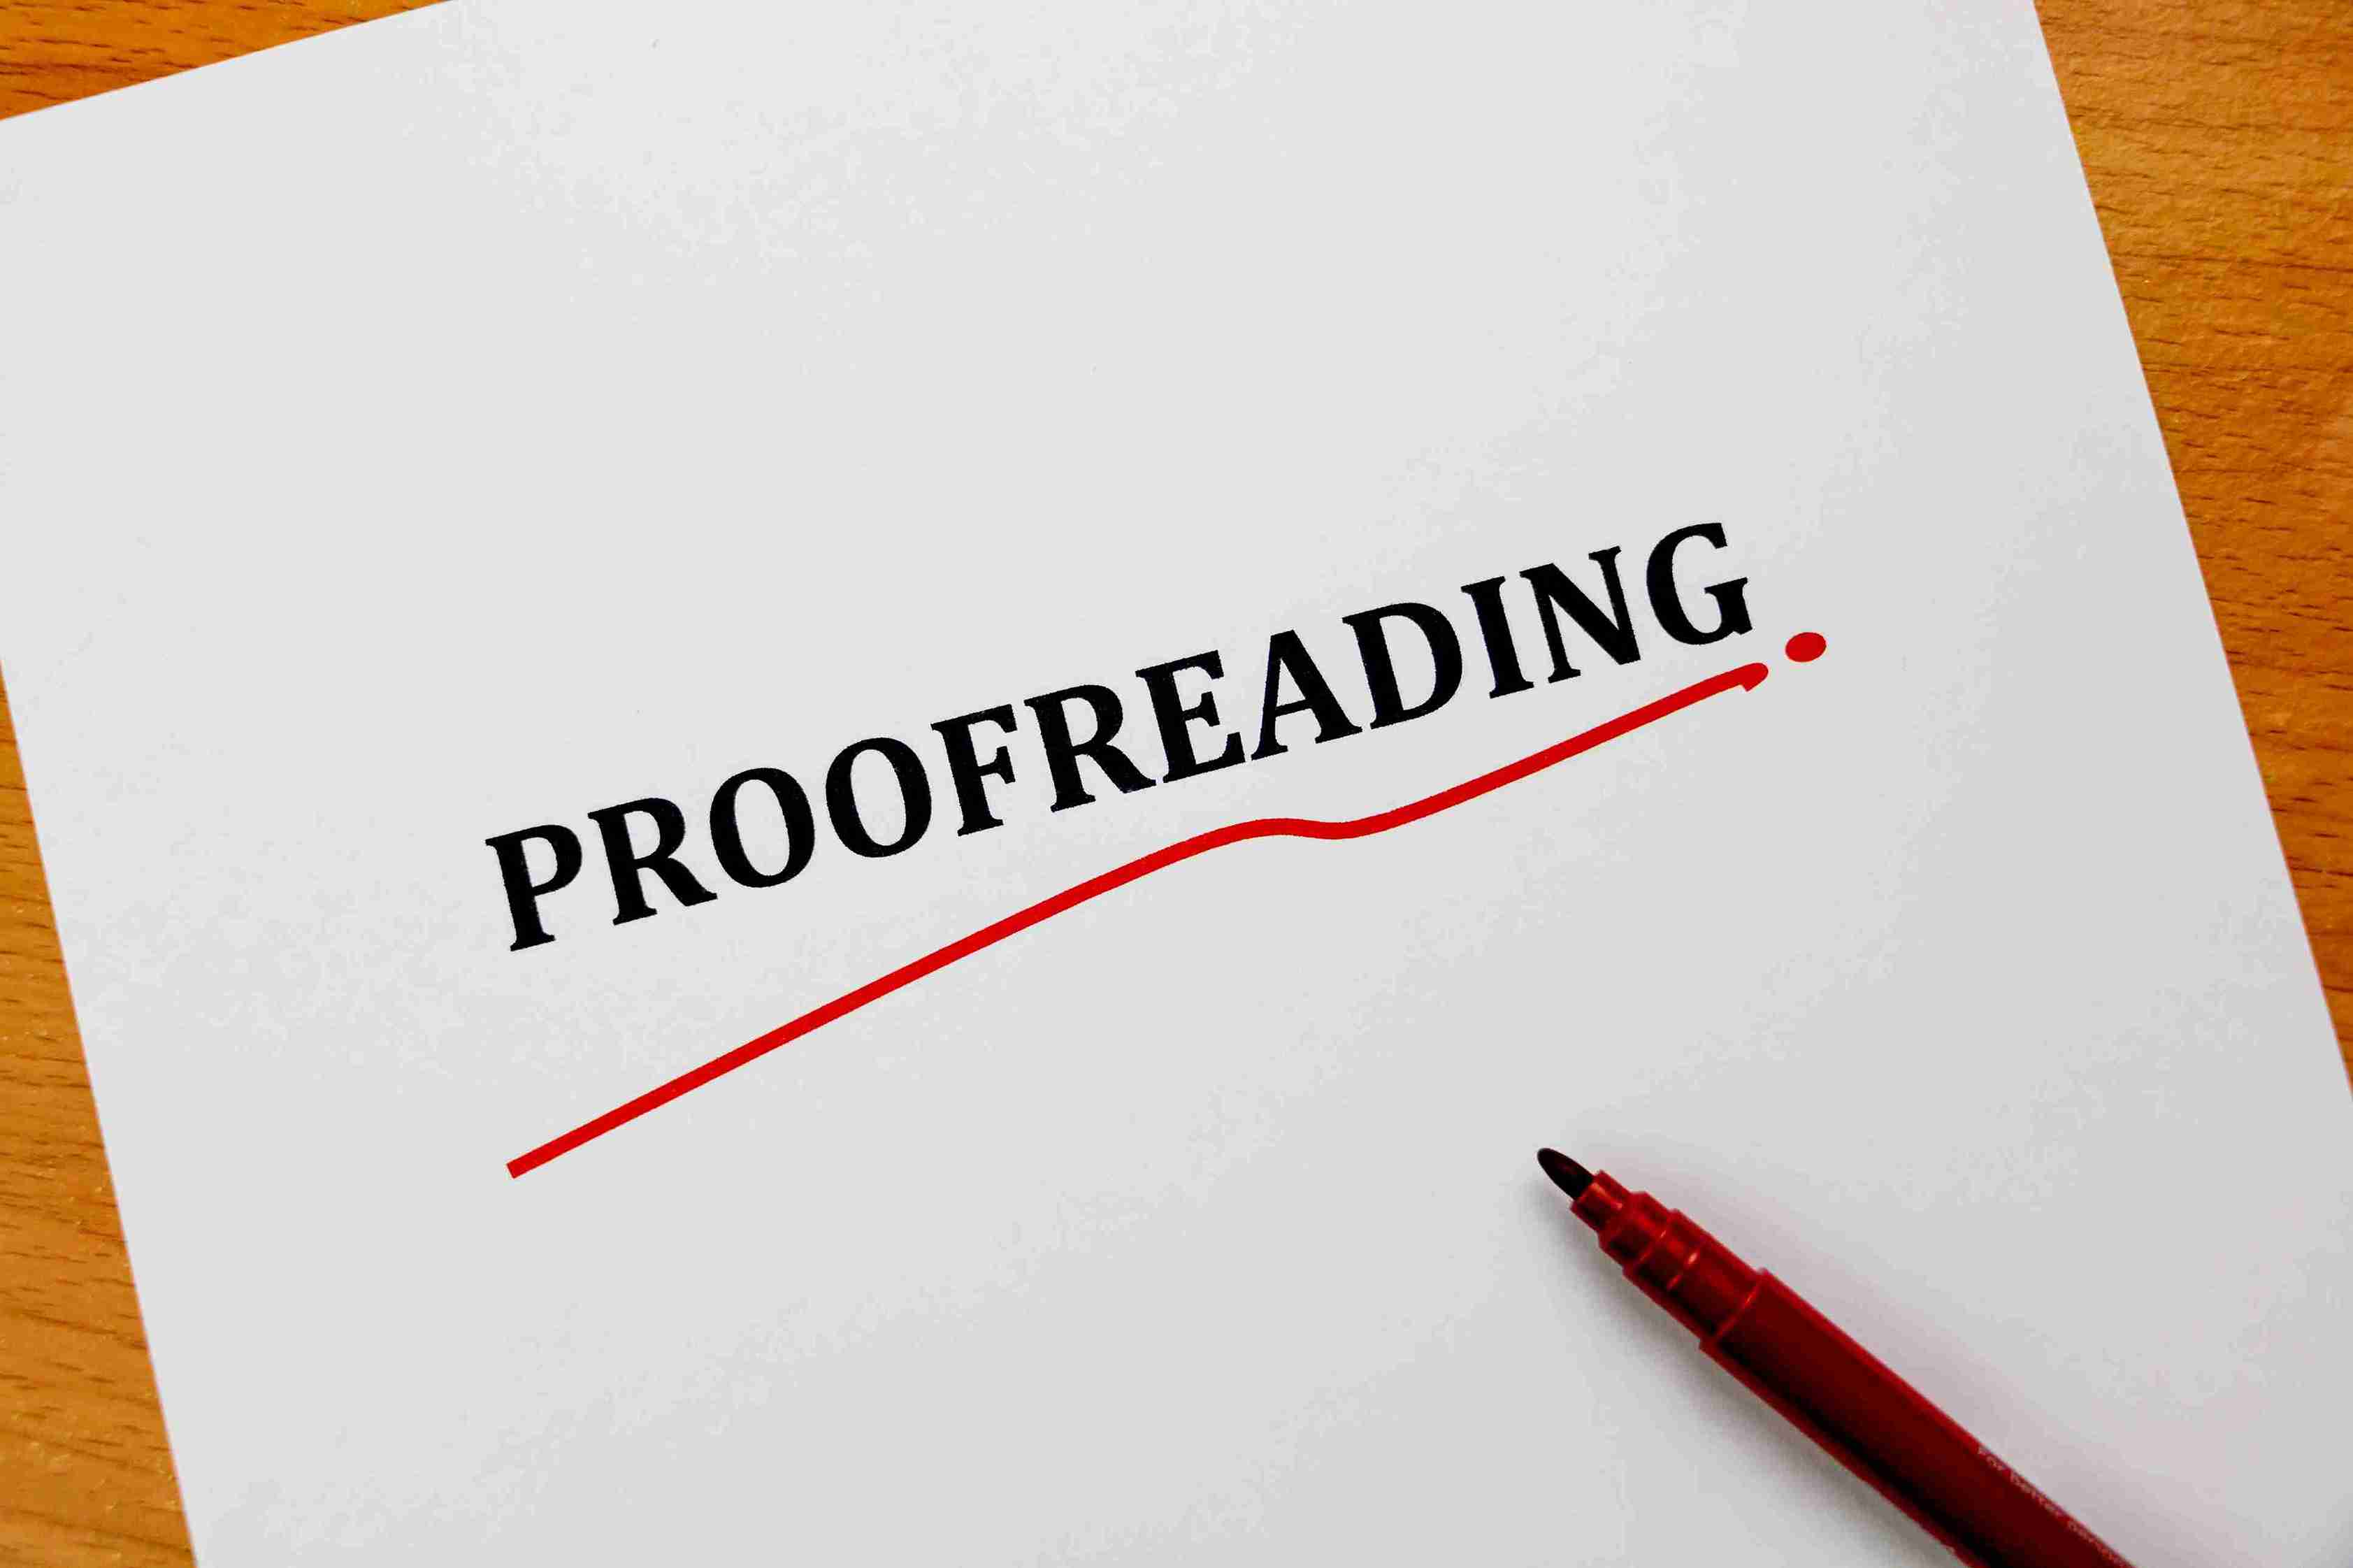 I am here to proofread and edit your writing of 1000 words just for $5.